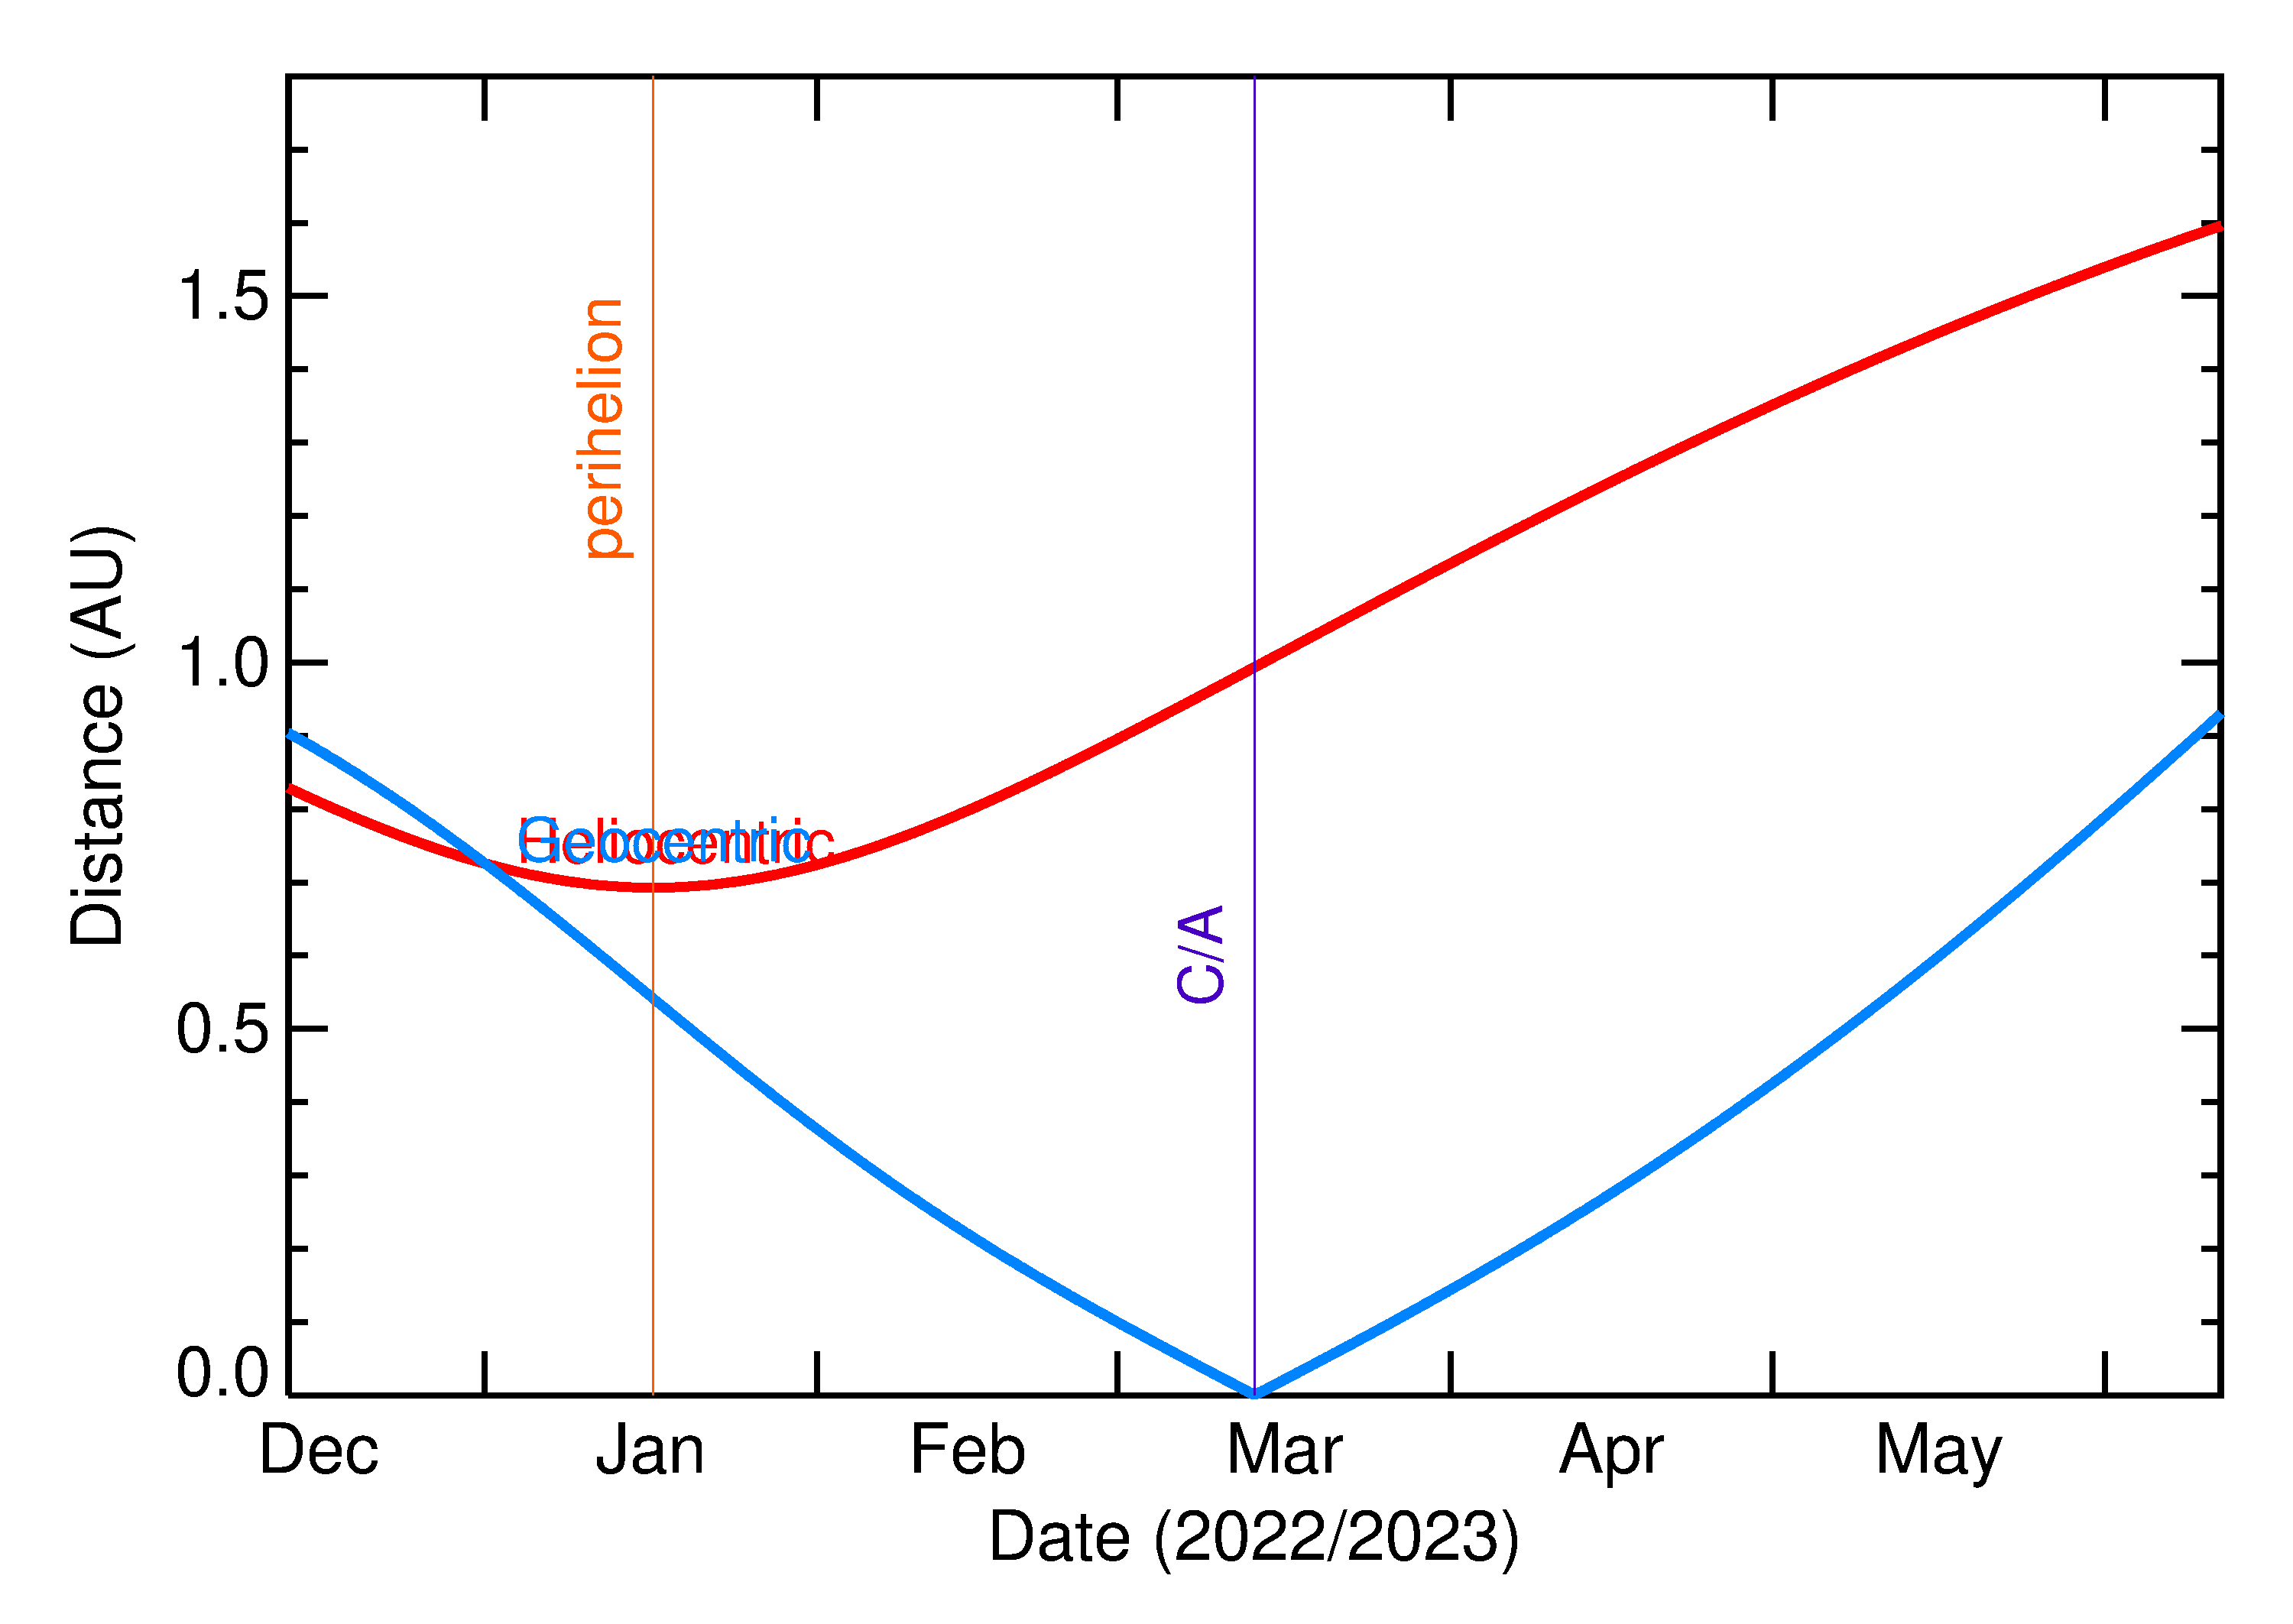 Heliocentric and Geocentric Distances of 2023 ET2 in the months around closest approach